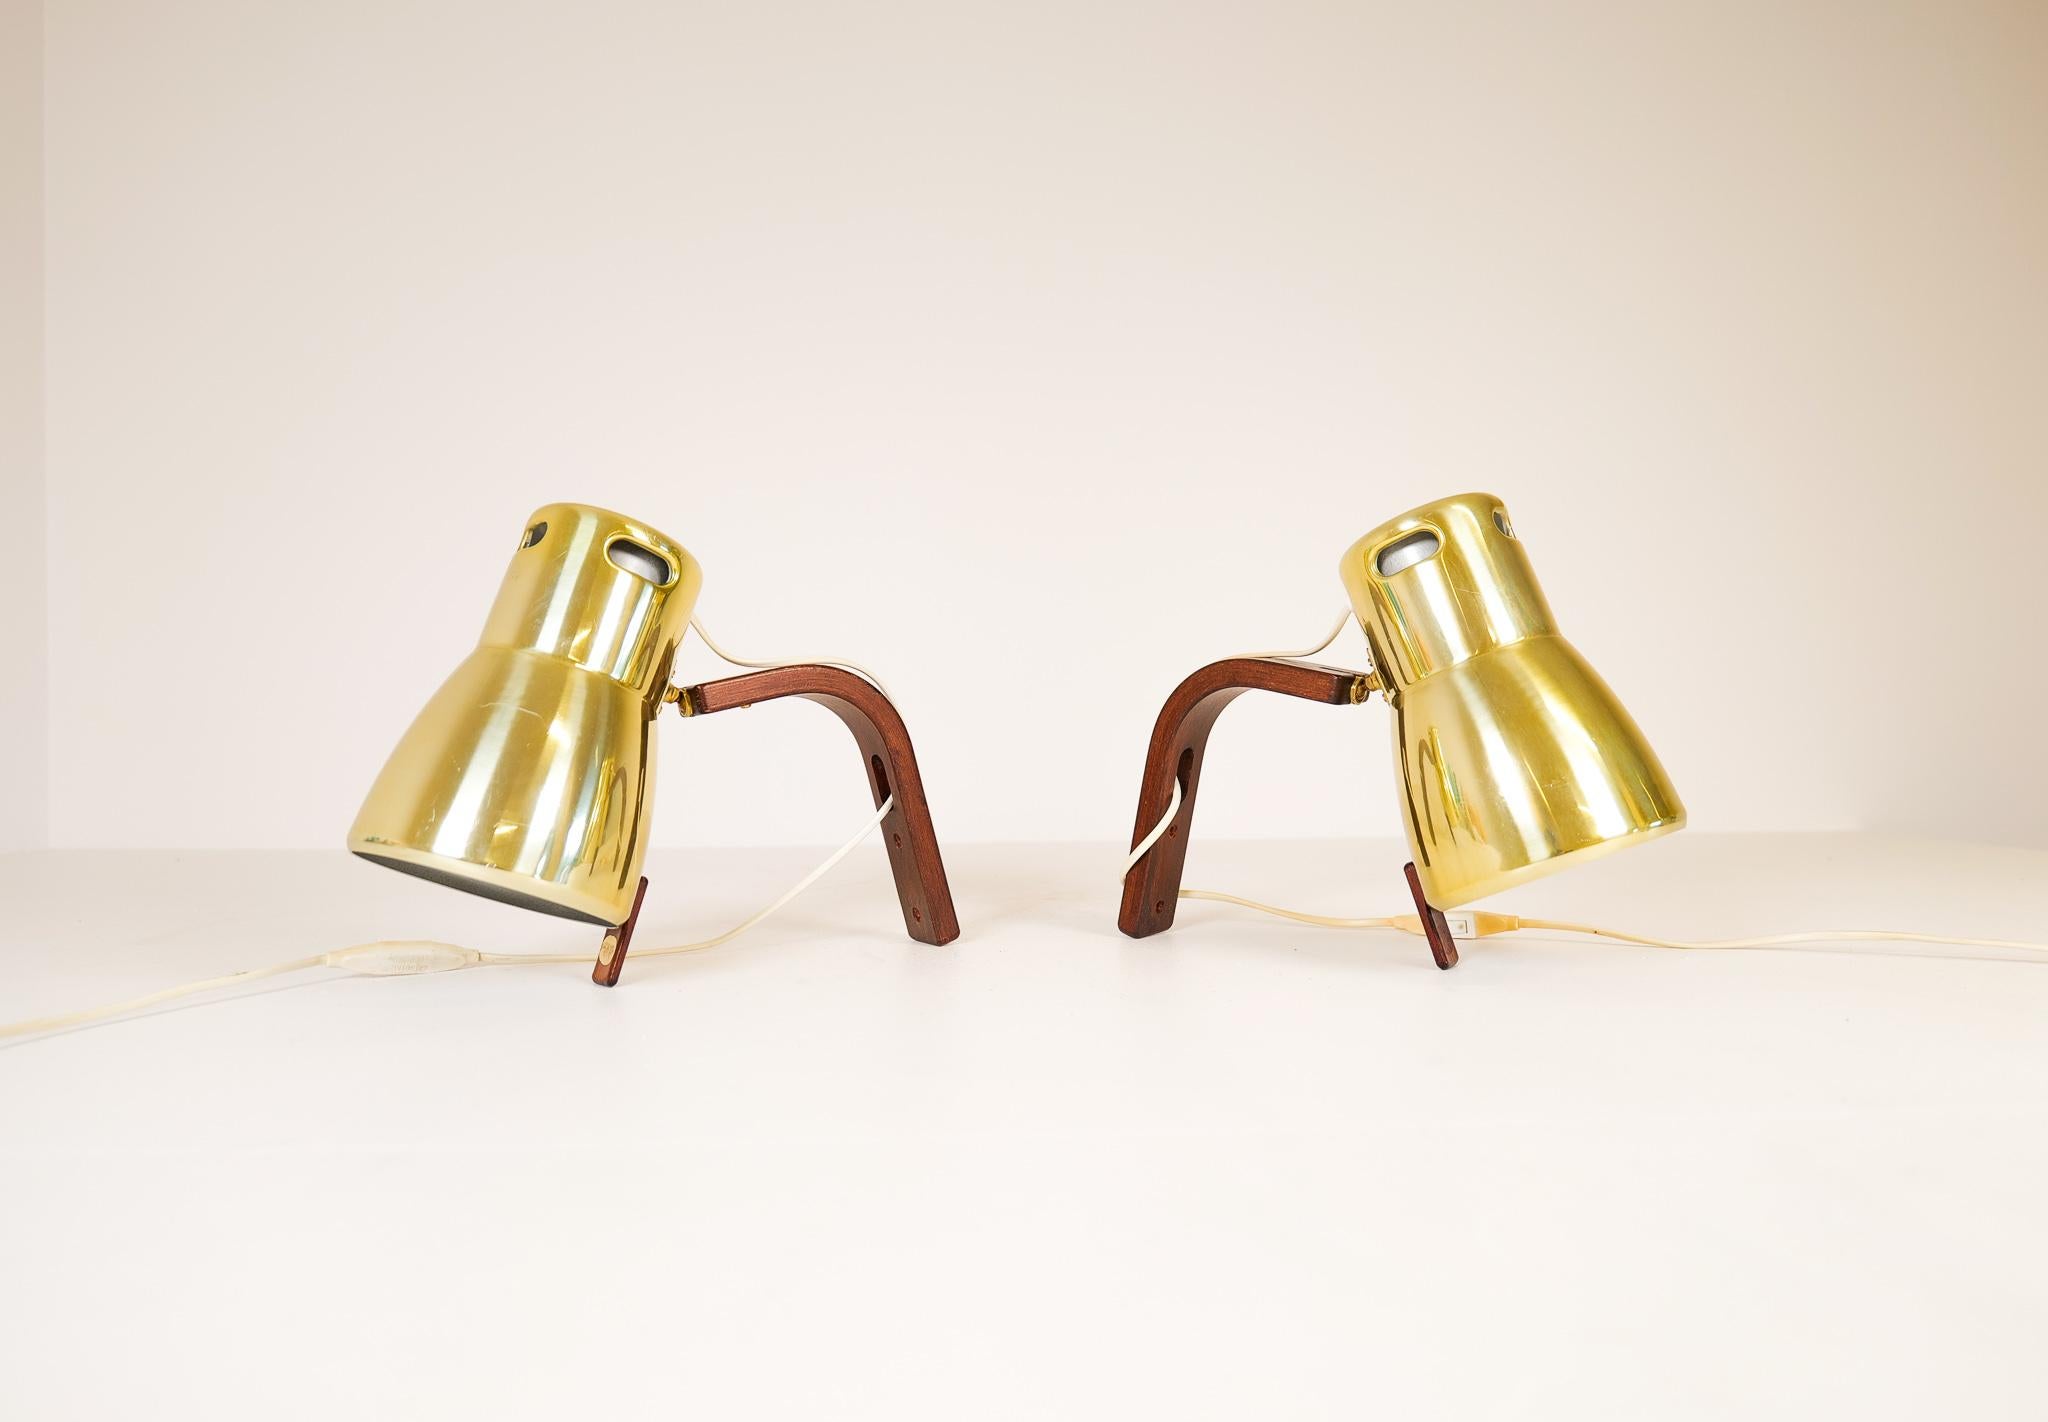 Hans-Agne Jakobsson Brass and Stained Wood Wall Lamps, Sweden, 1970s For Sale 14